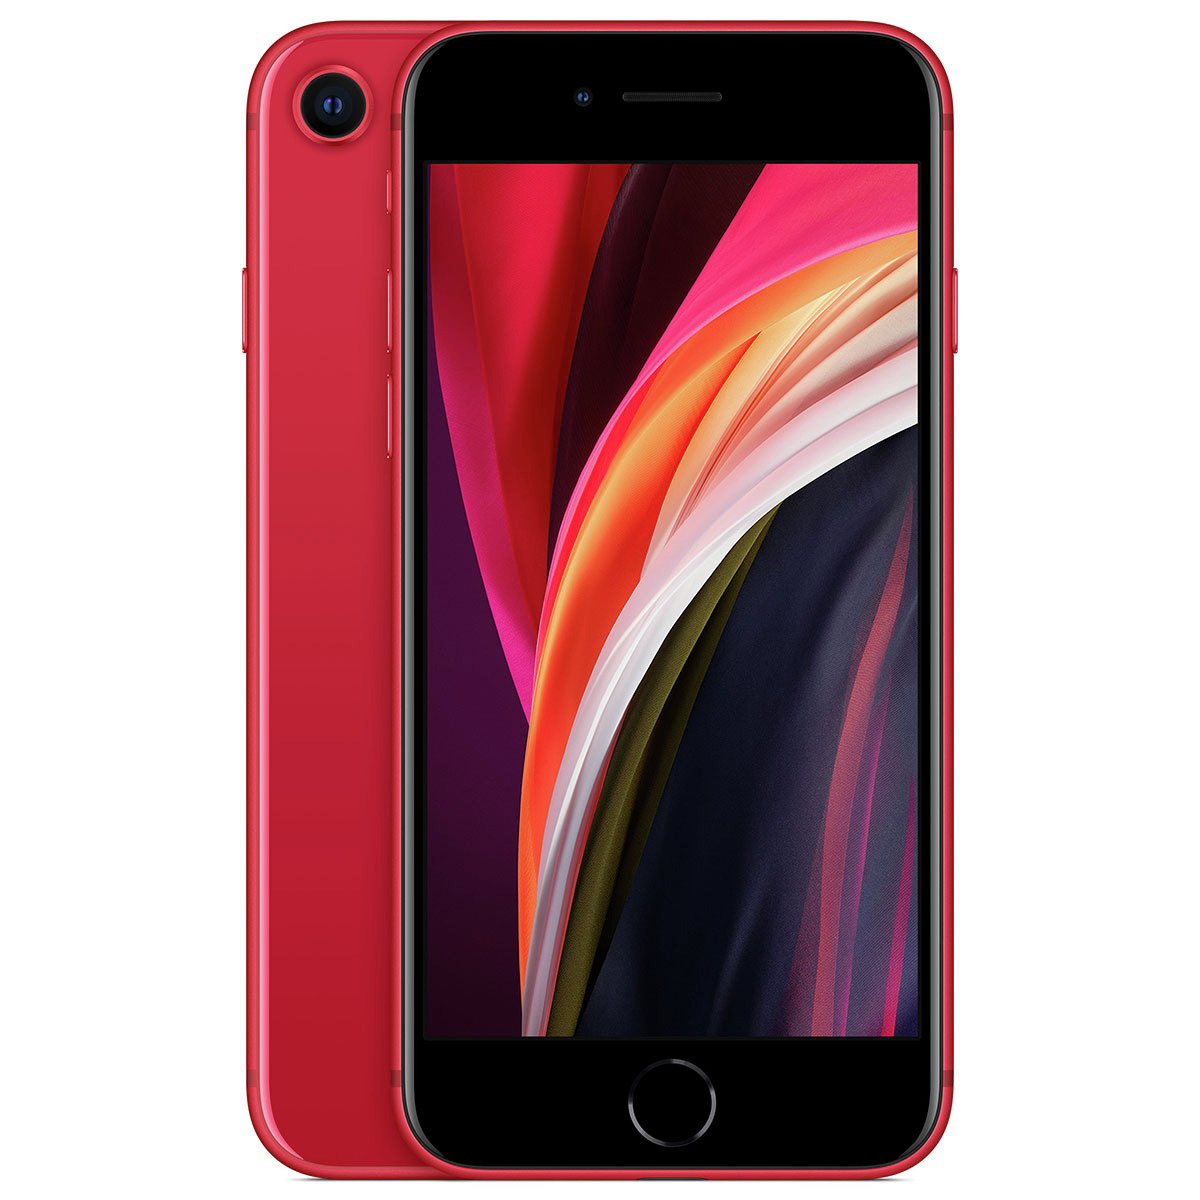 SIM Free iPhone SE 128GB Mobile Phone - Product Red